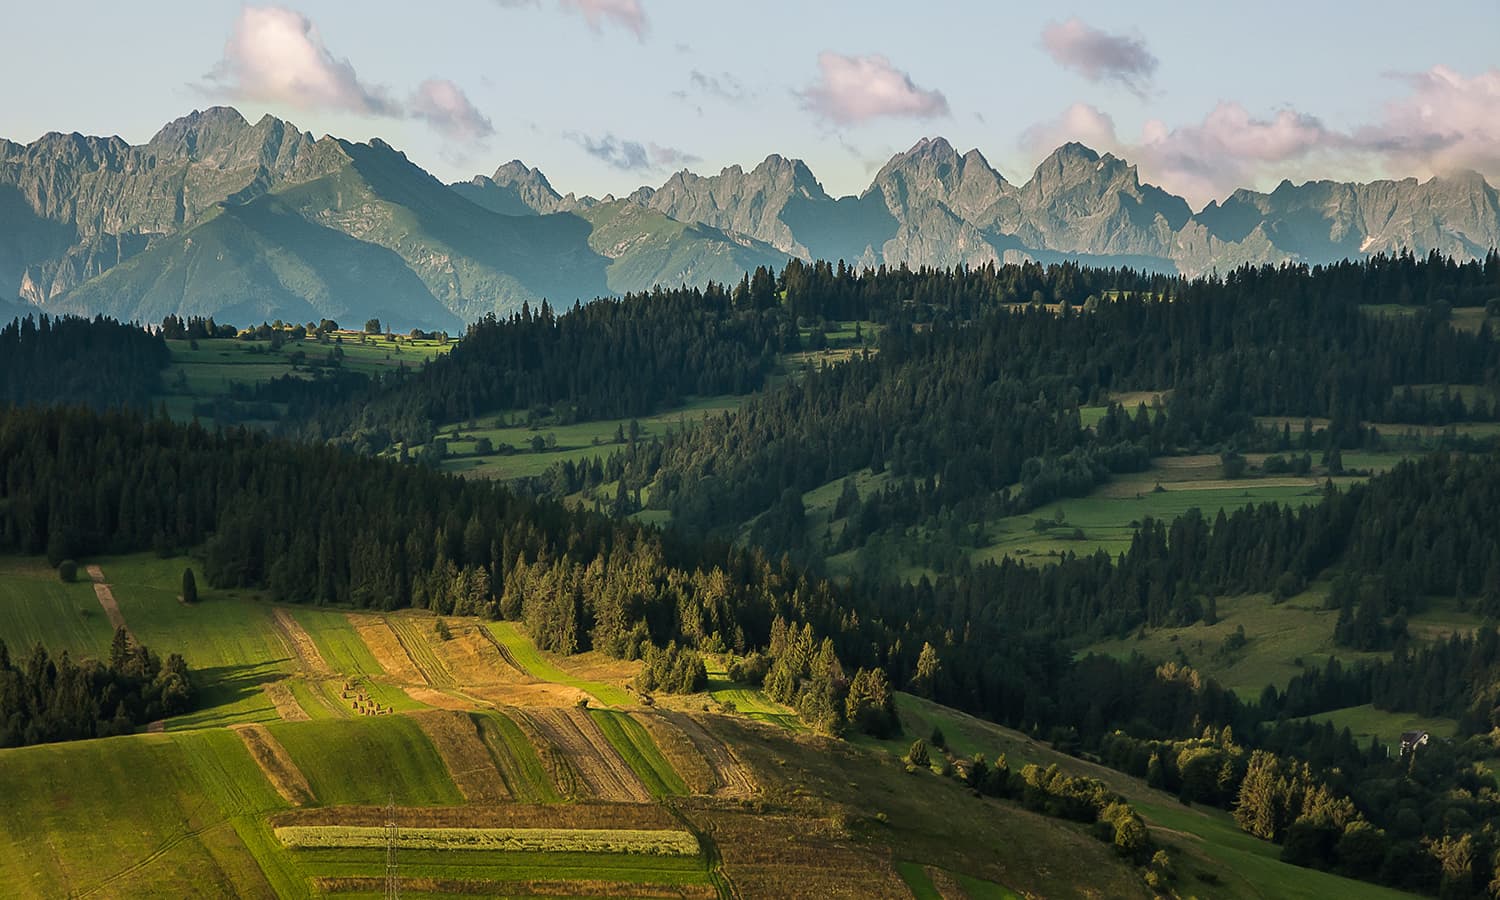 High Tatras as seen from the Polish Spisz, Tatry Natura 2000 Special Area of Conservation, Lesser Poland Voivodeship, Poland. — Photo by Łukasz Śmigasiewicz